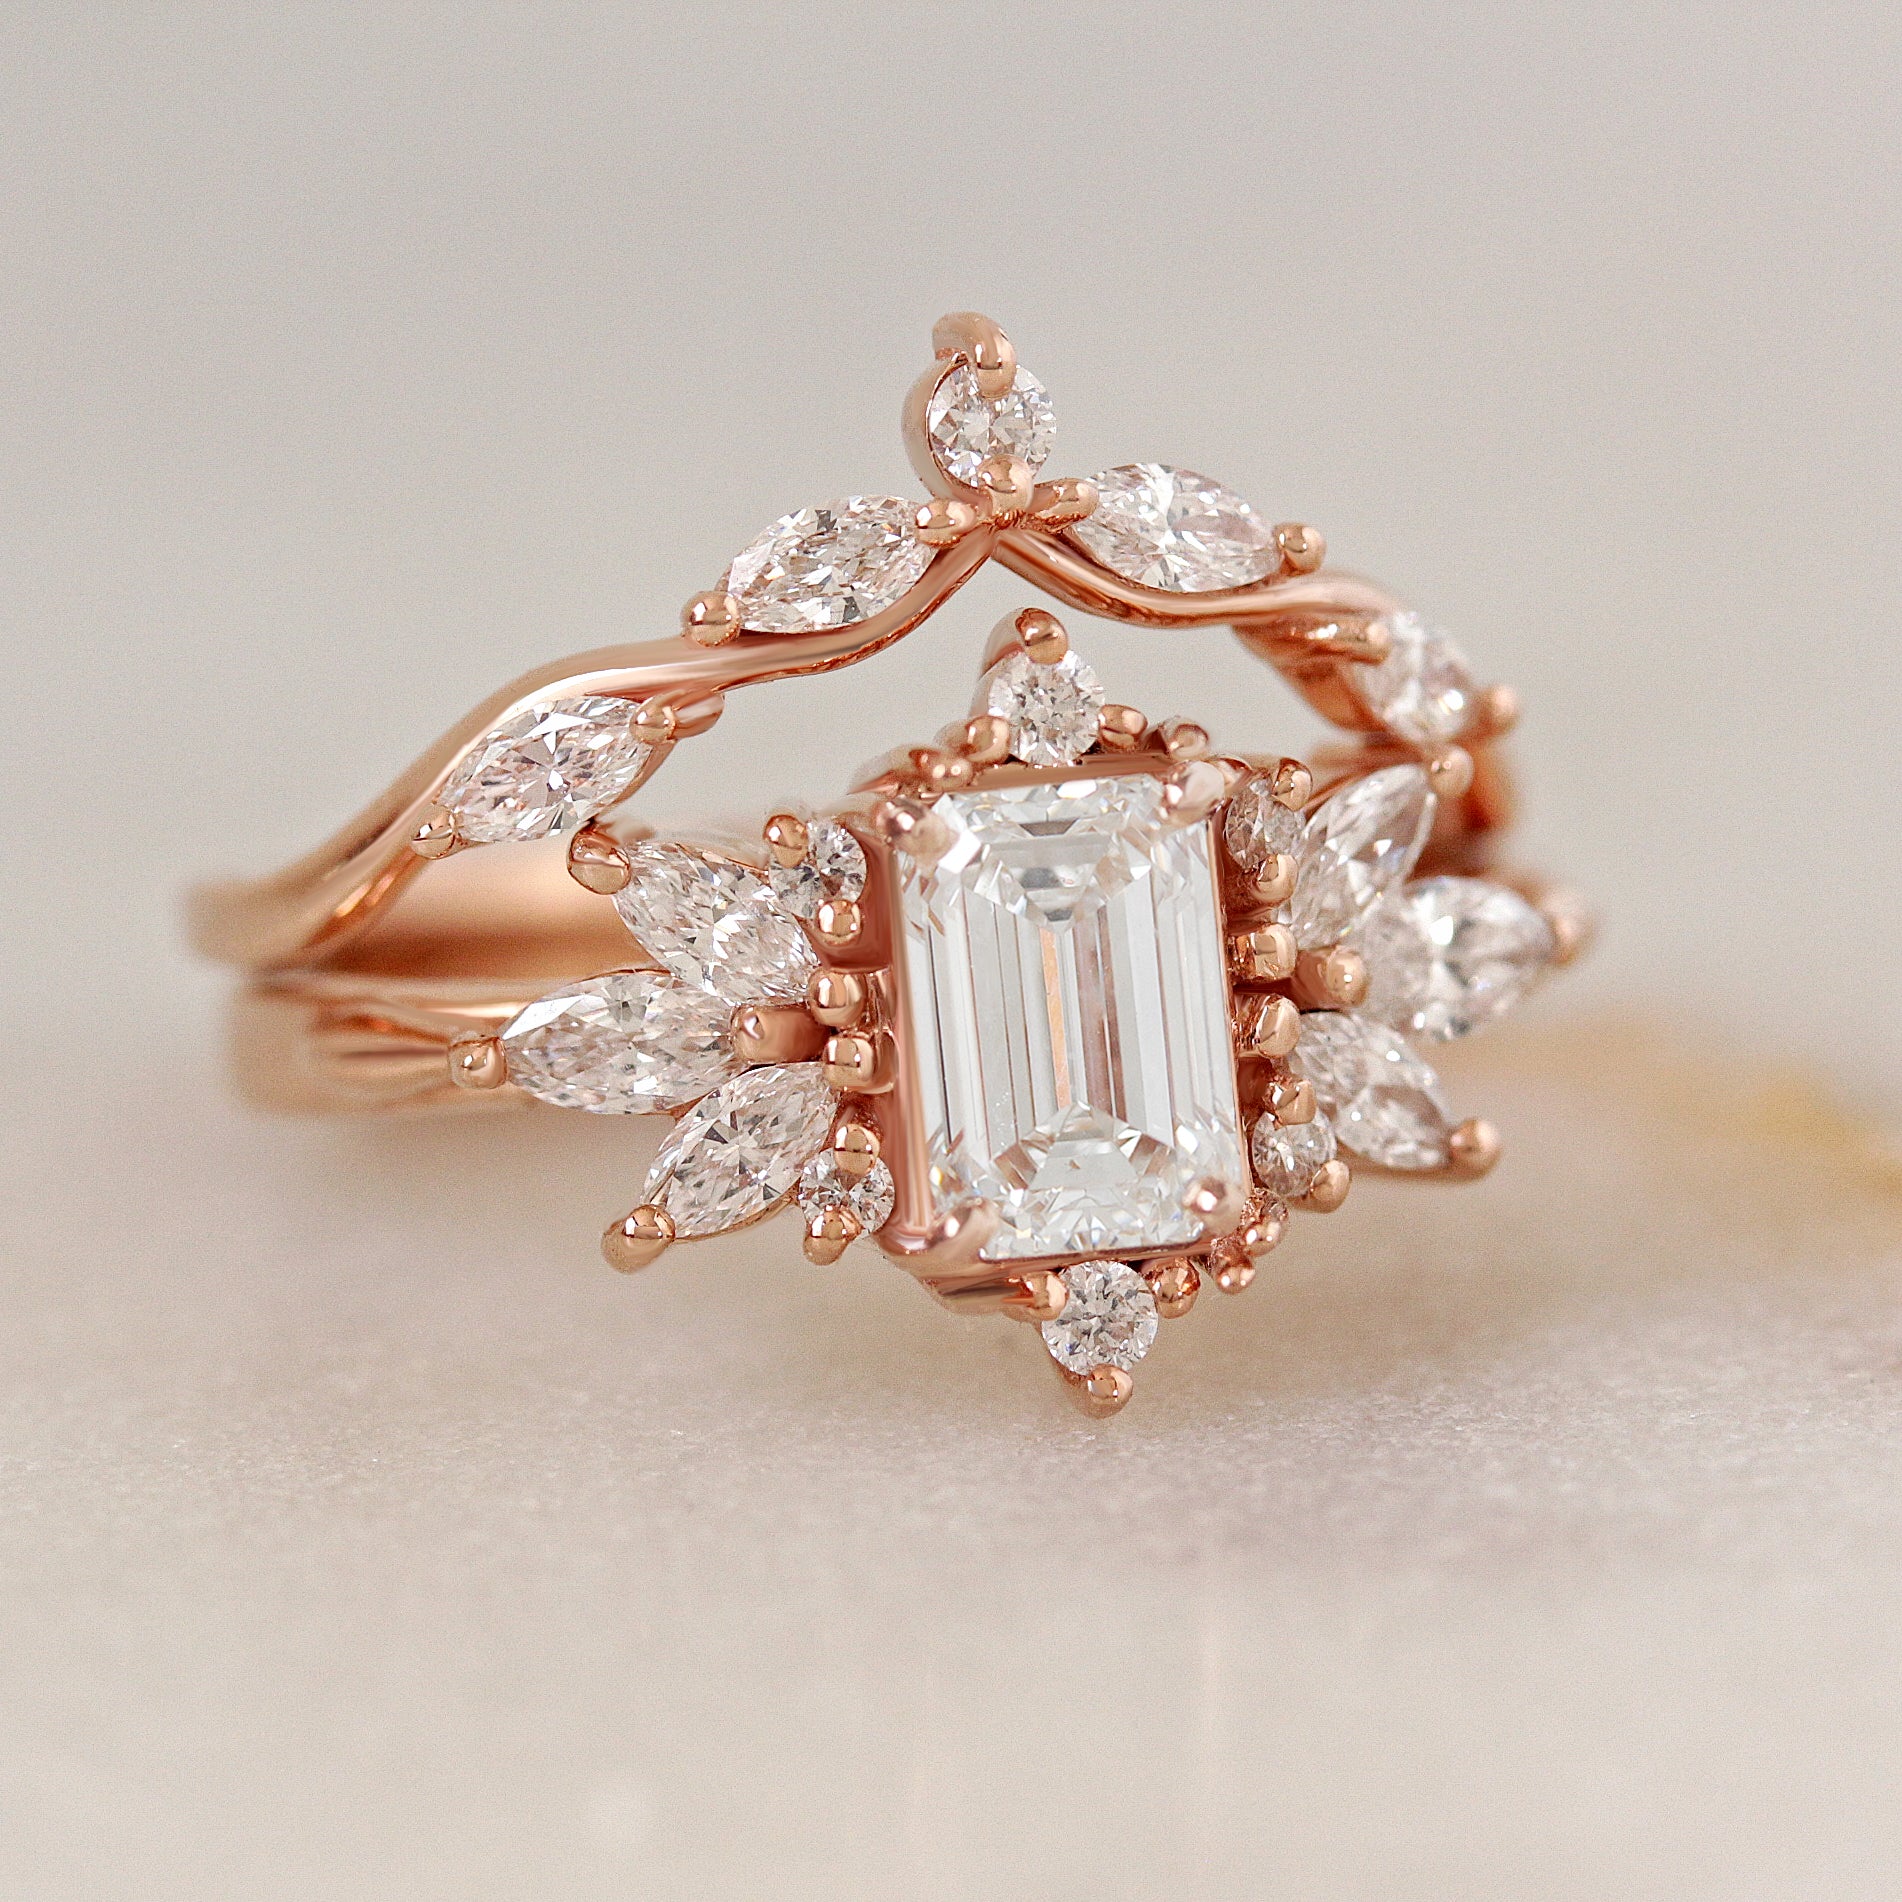 Emerald Cut Diamond Unique Engagement Ring with Marquise diamond Matching Wedding Ring Set Spark & Wavy